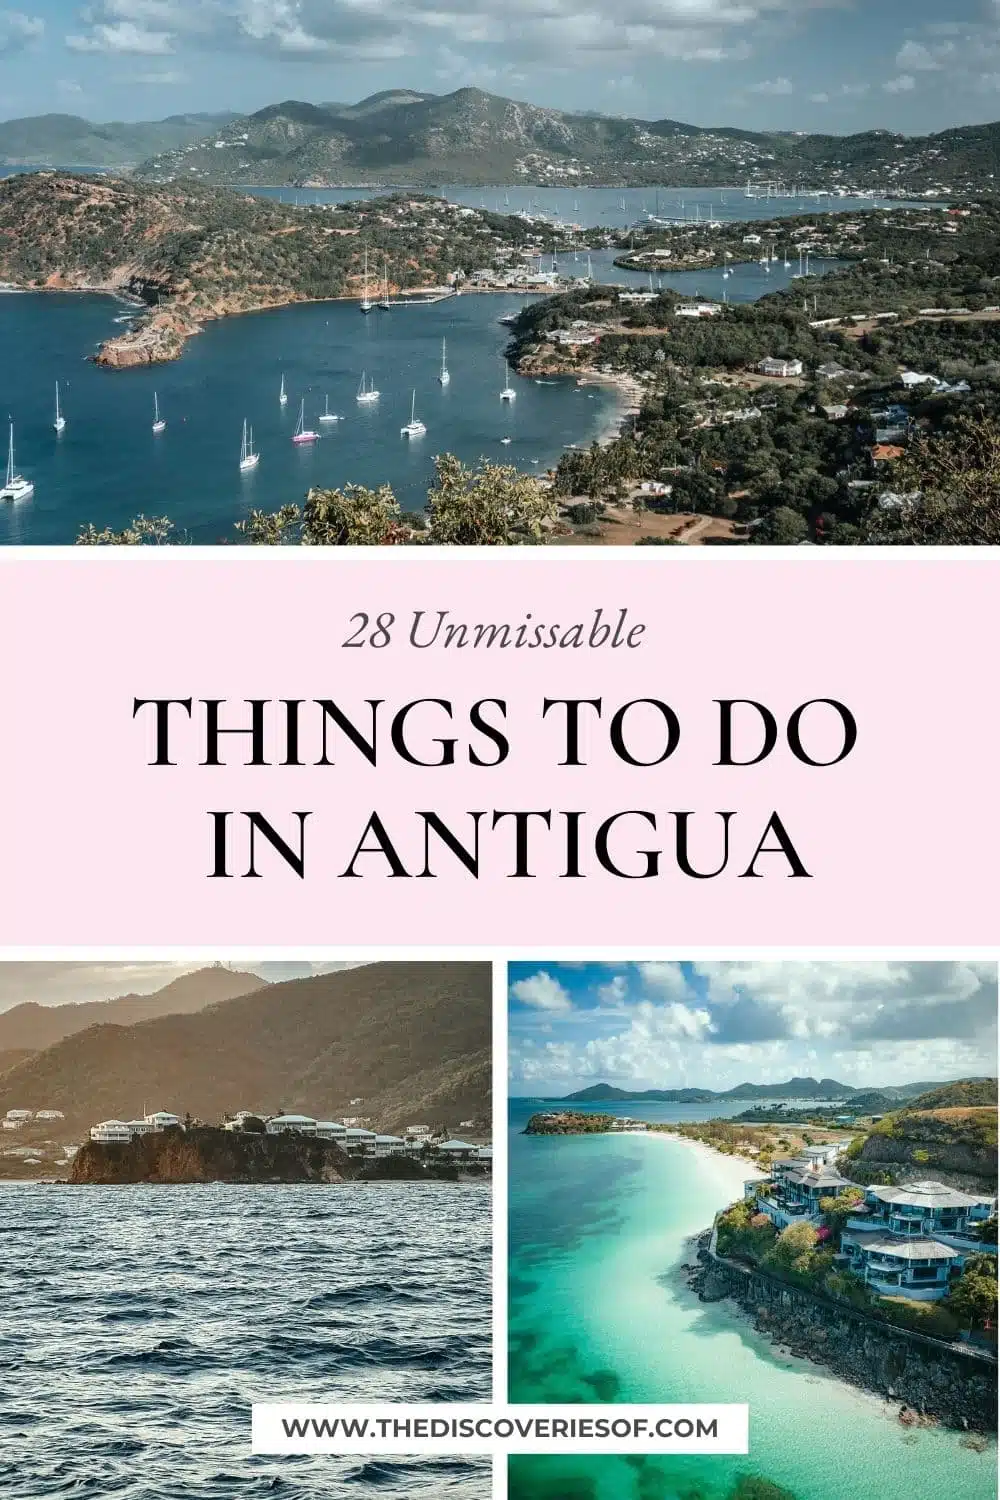 Things to do in Antigua Triple Pin